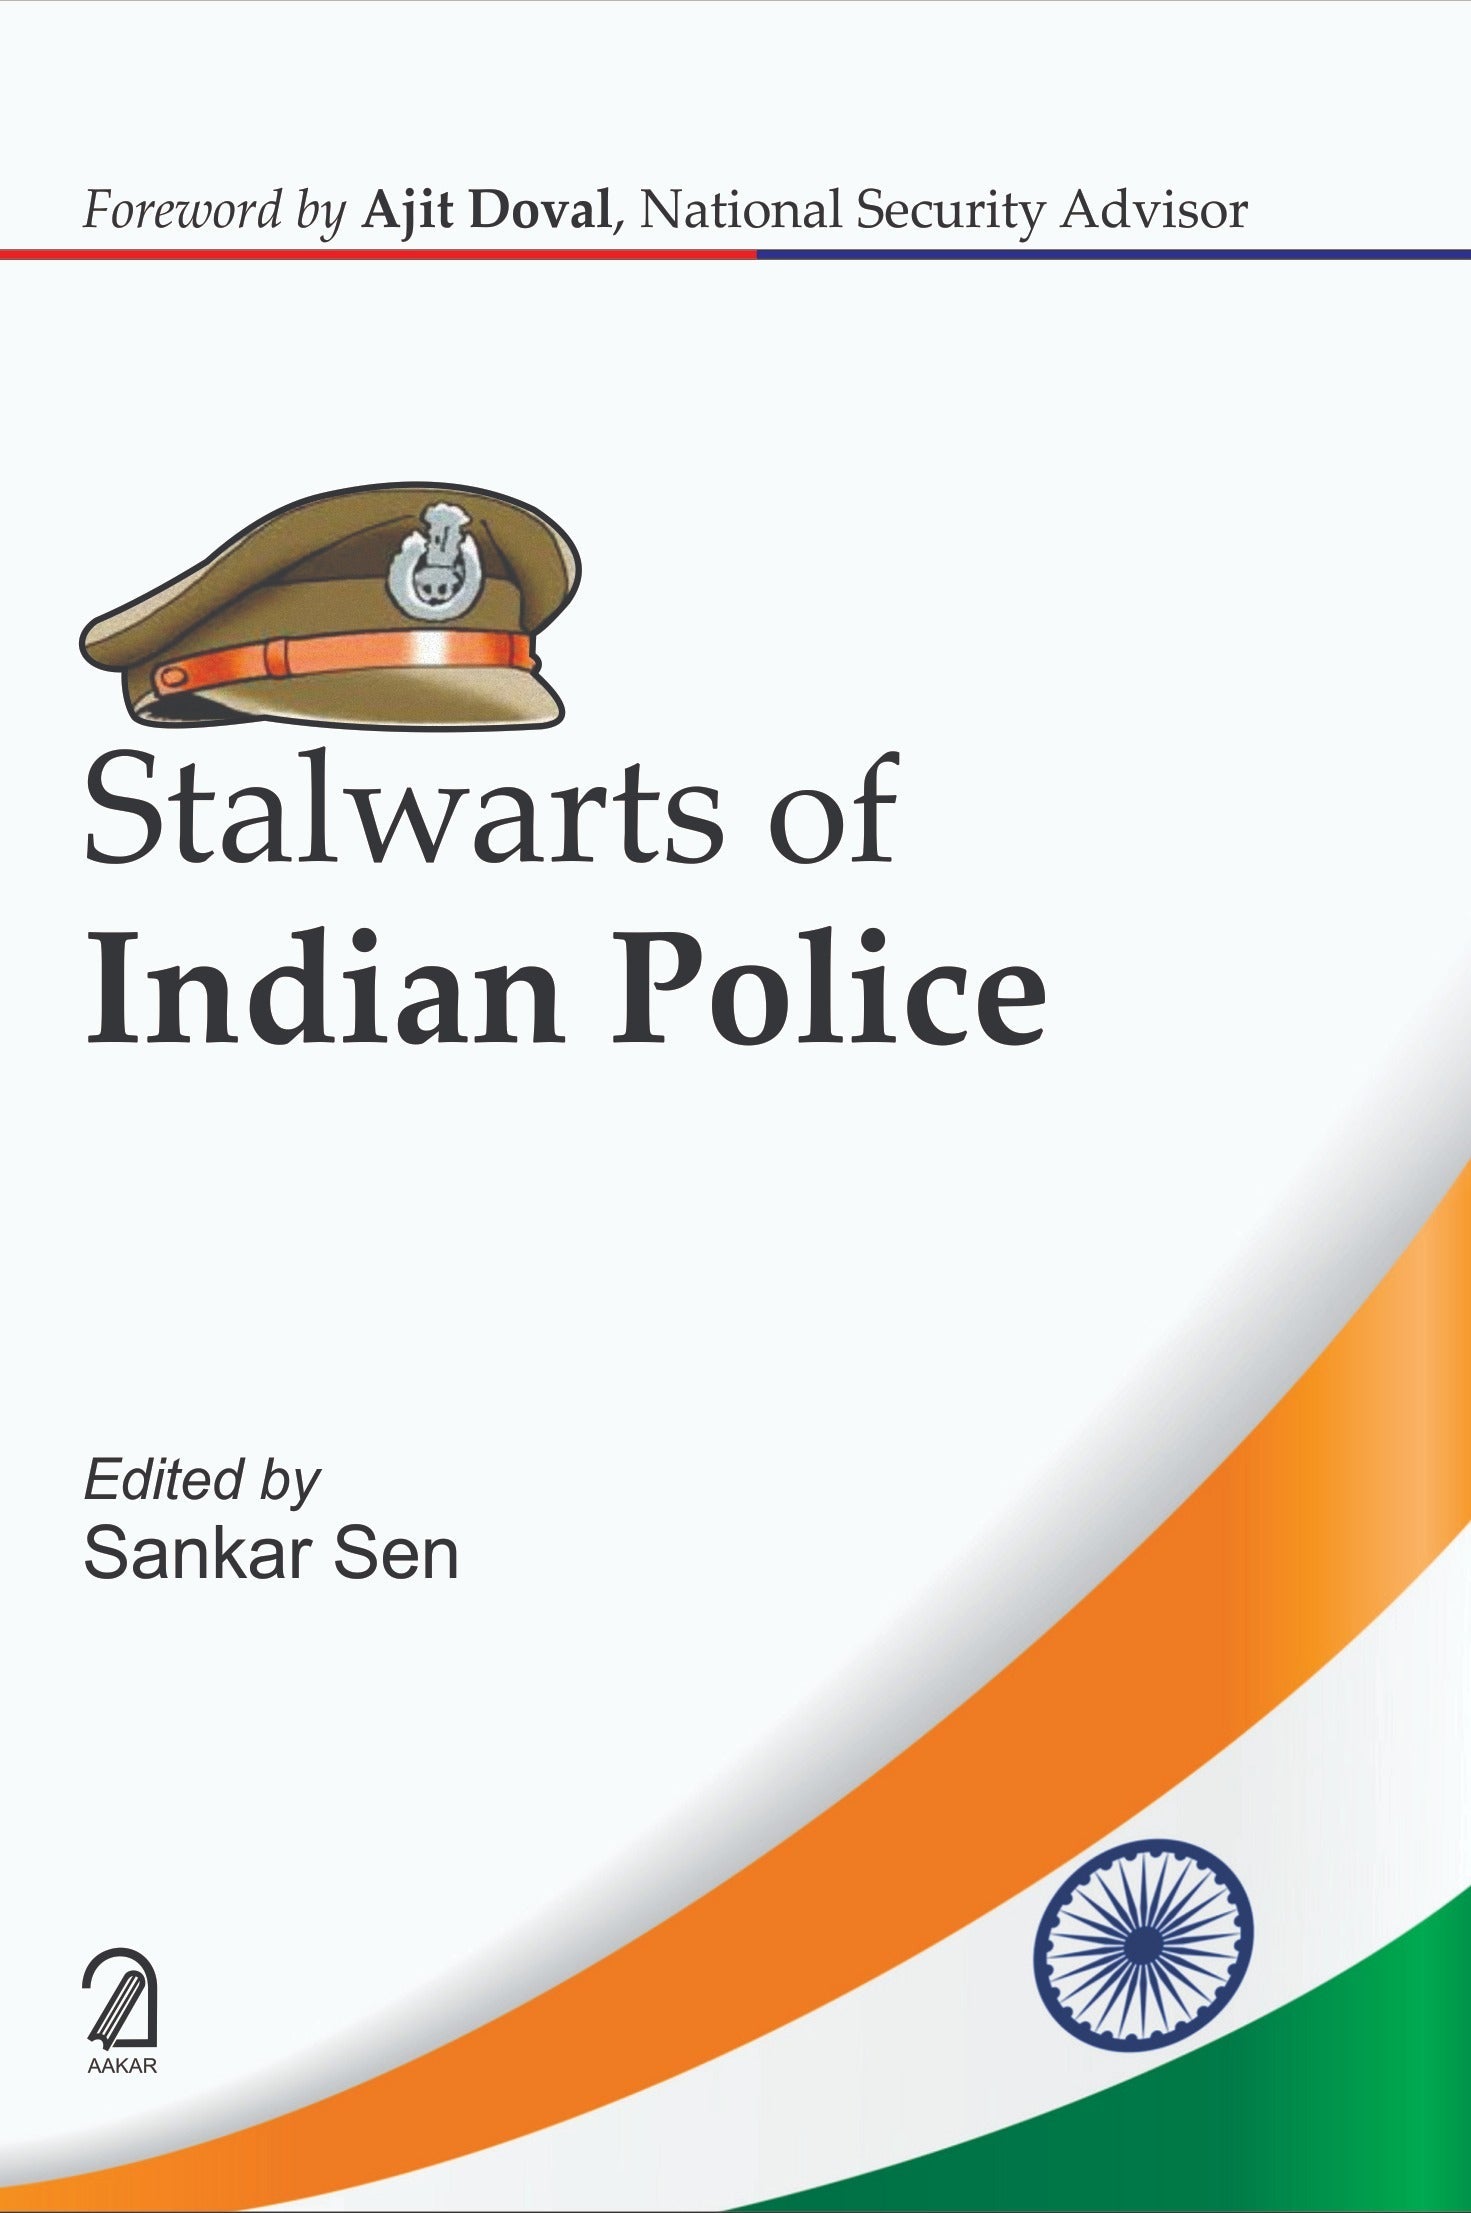 Stalwarts of Indian Police